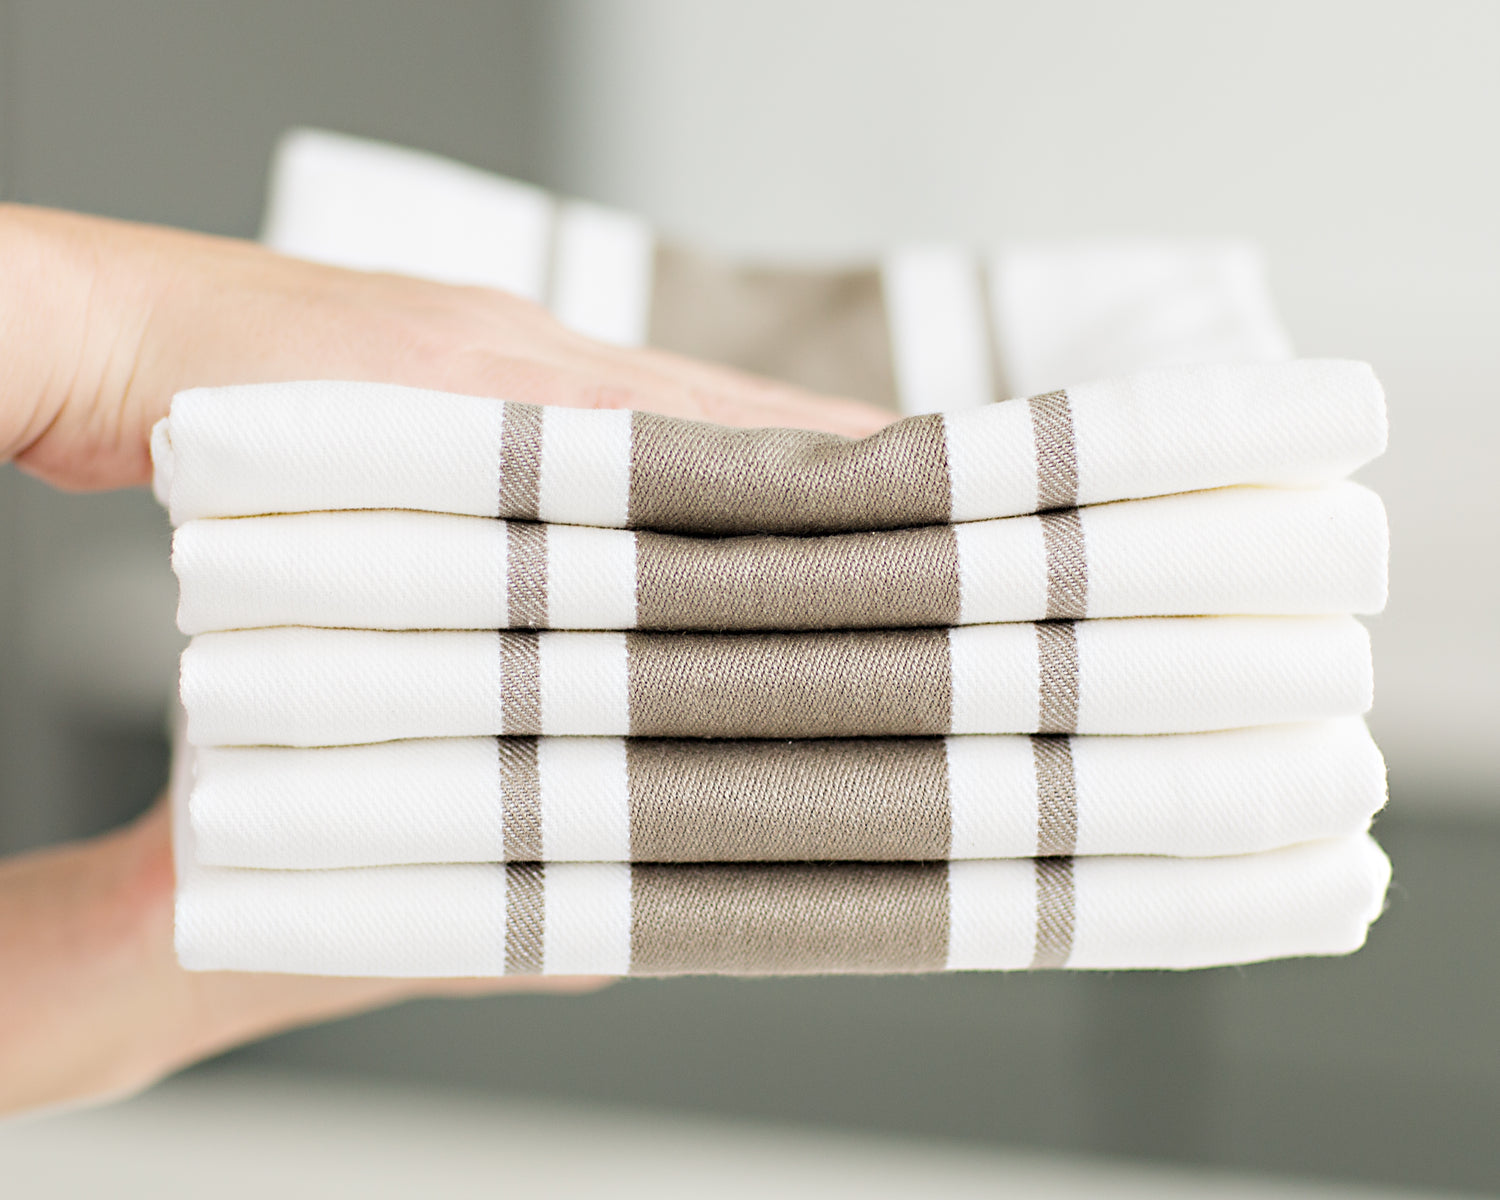 Kitchen Towels Set - Pack of 6 Cotton Dish Towels for Drying Set of 6 Beige